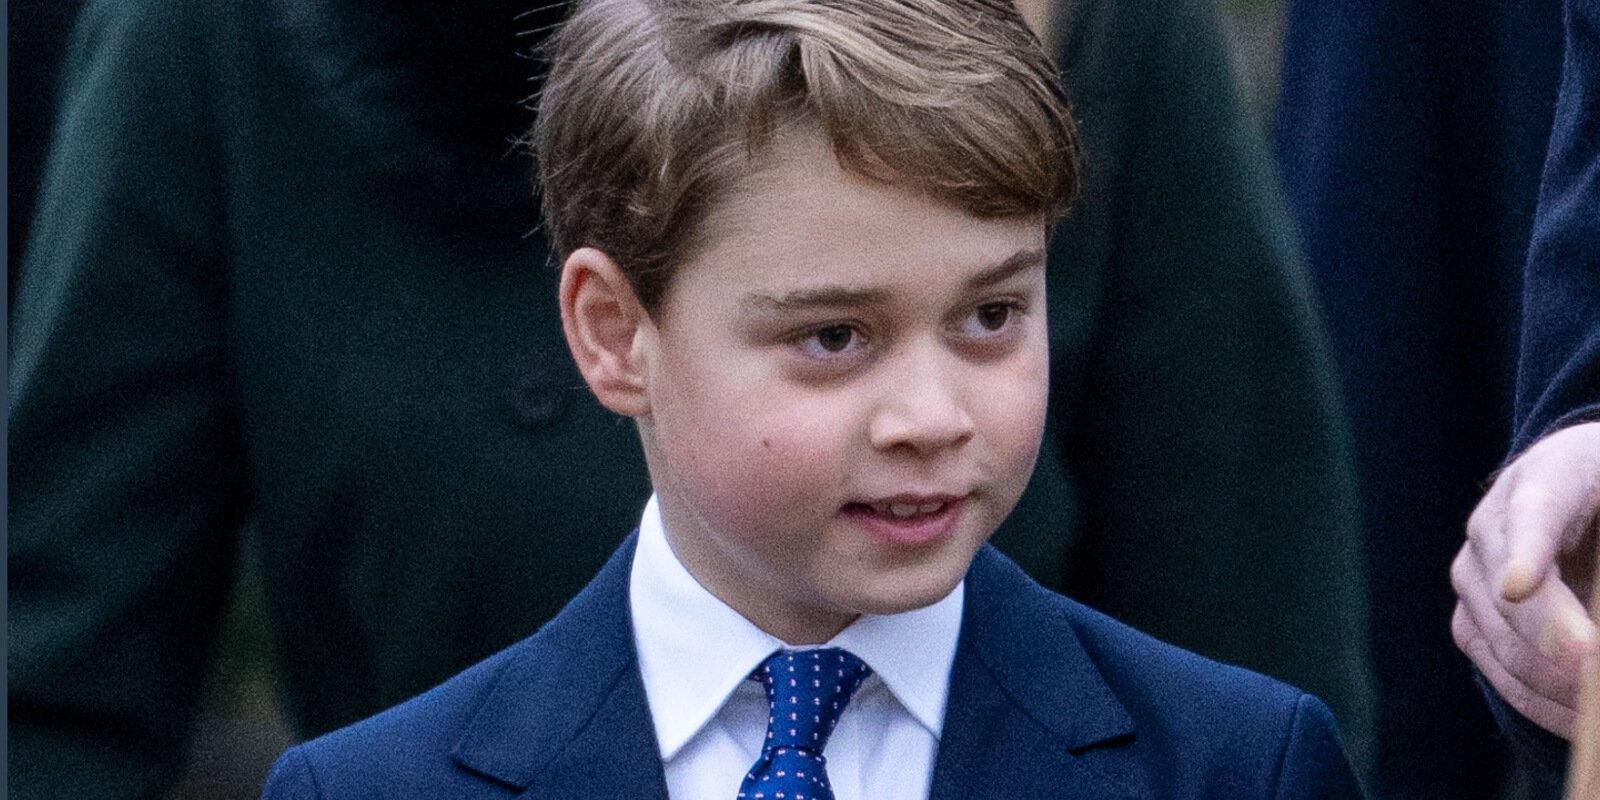 Prince George will have a role in King Charles III's coronation.